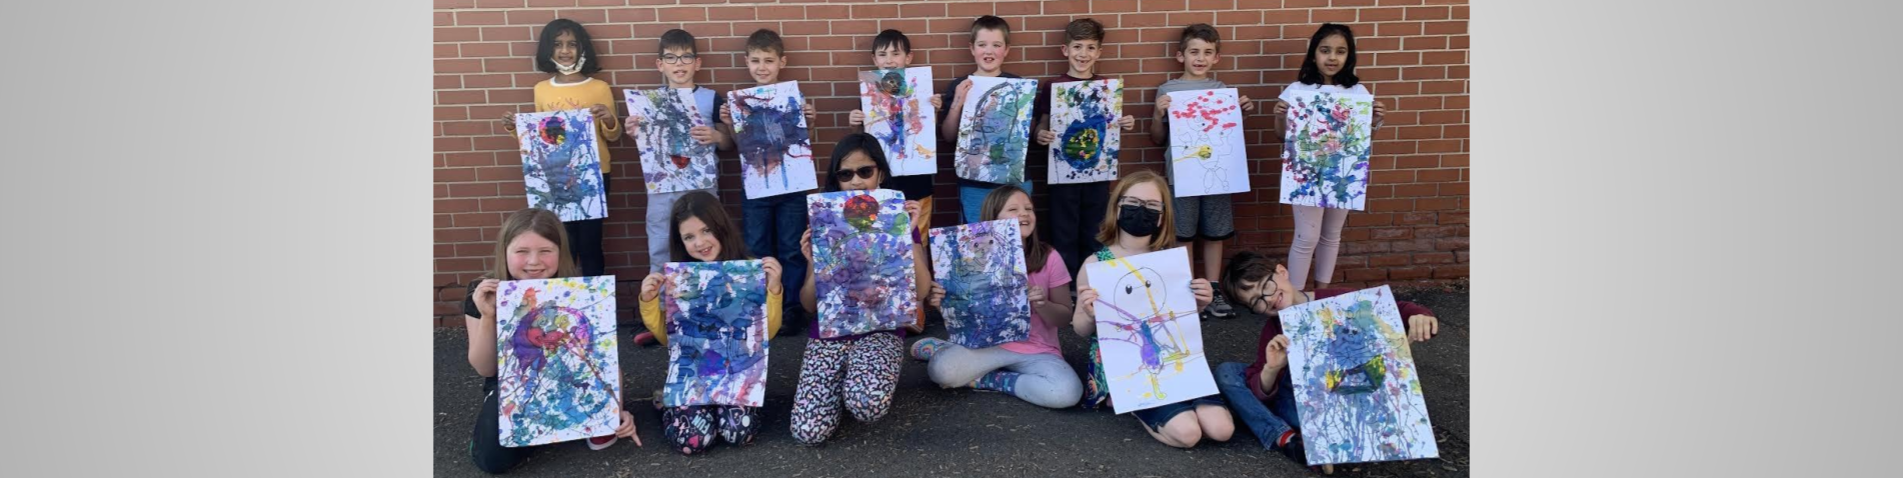 Students posing outside with their splash artwork